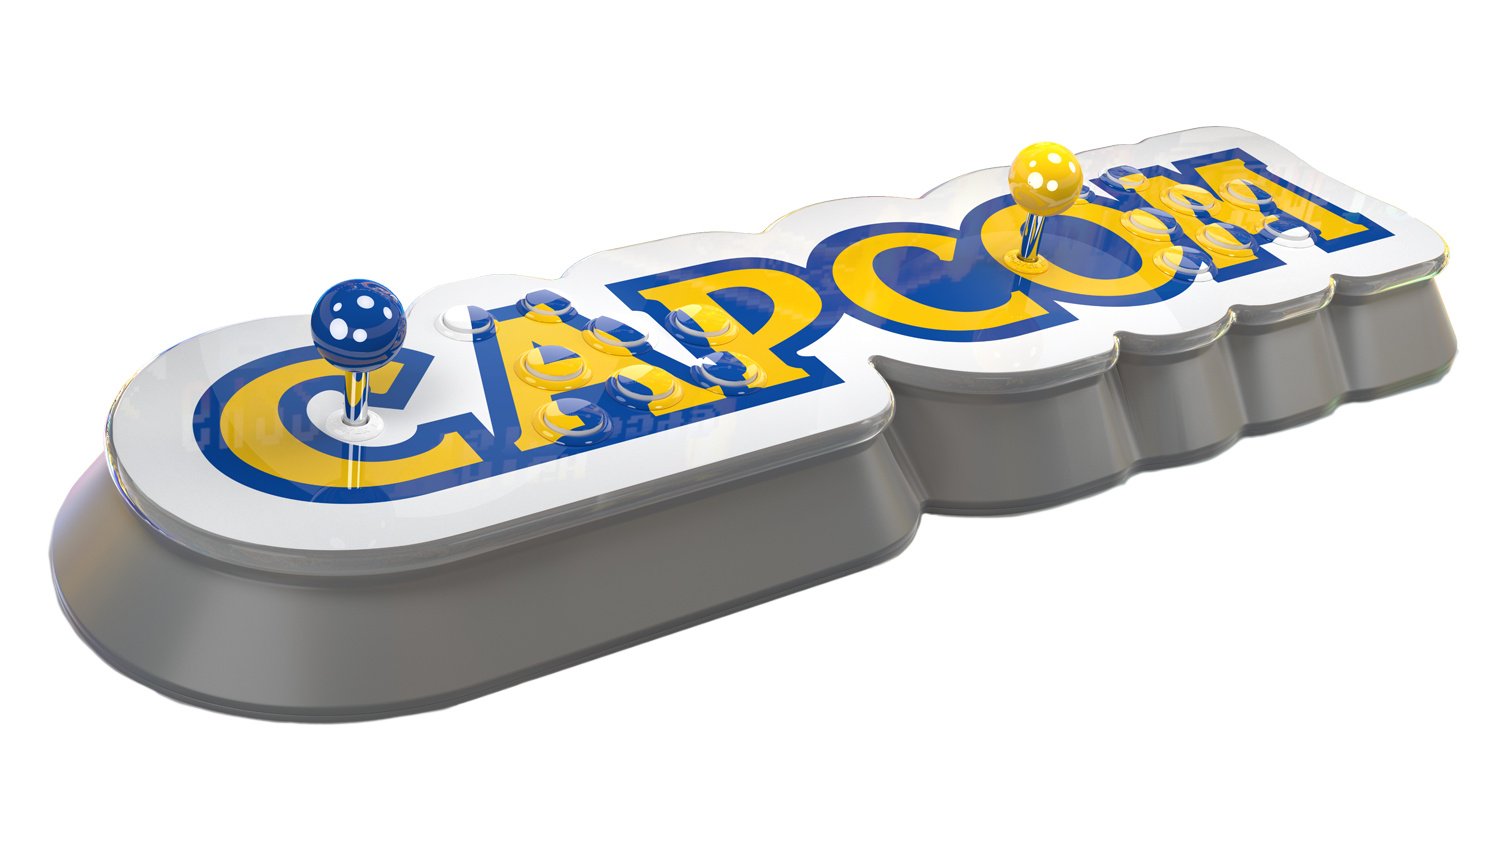 Capcom making announcement tomorrow, rumored to be plug-and-play console